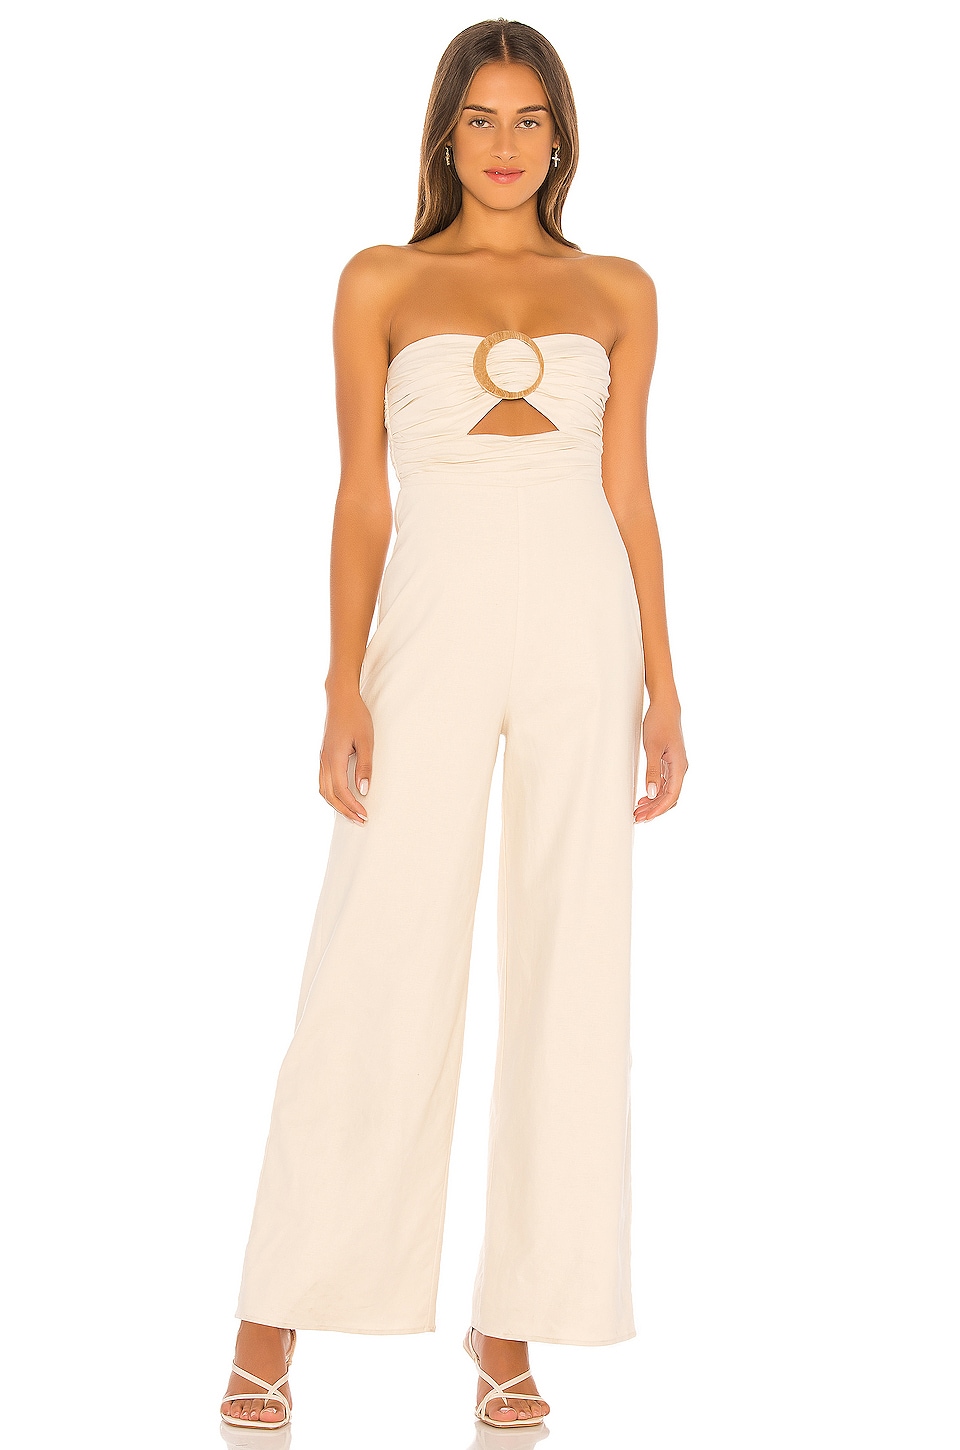 House of Harlow 1960 x REVOLVE Amma Jumpsuit in Natural | REVOLVE